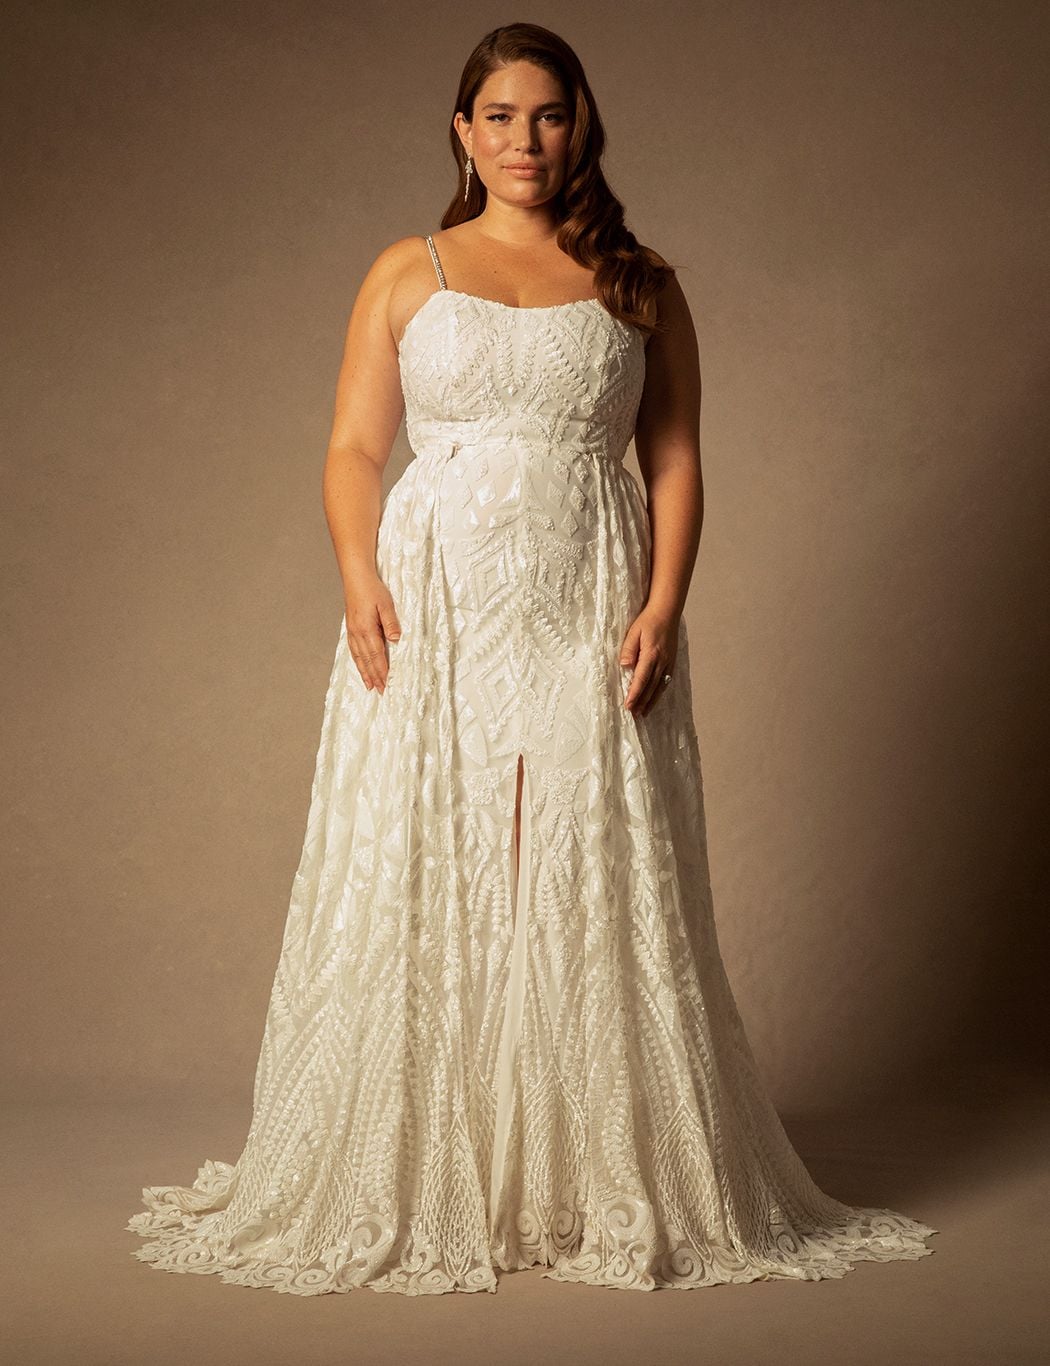 Plus Size Wedding Dresses For Your Perfect Wedding